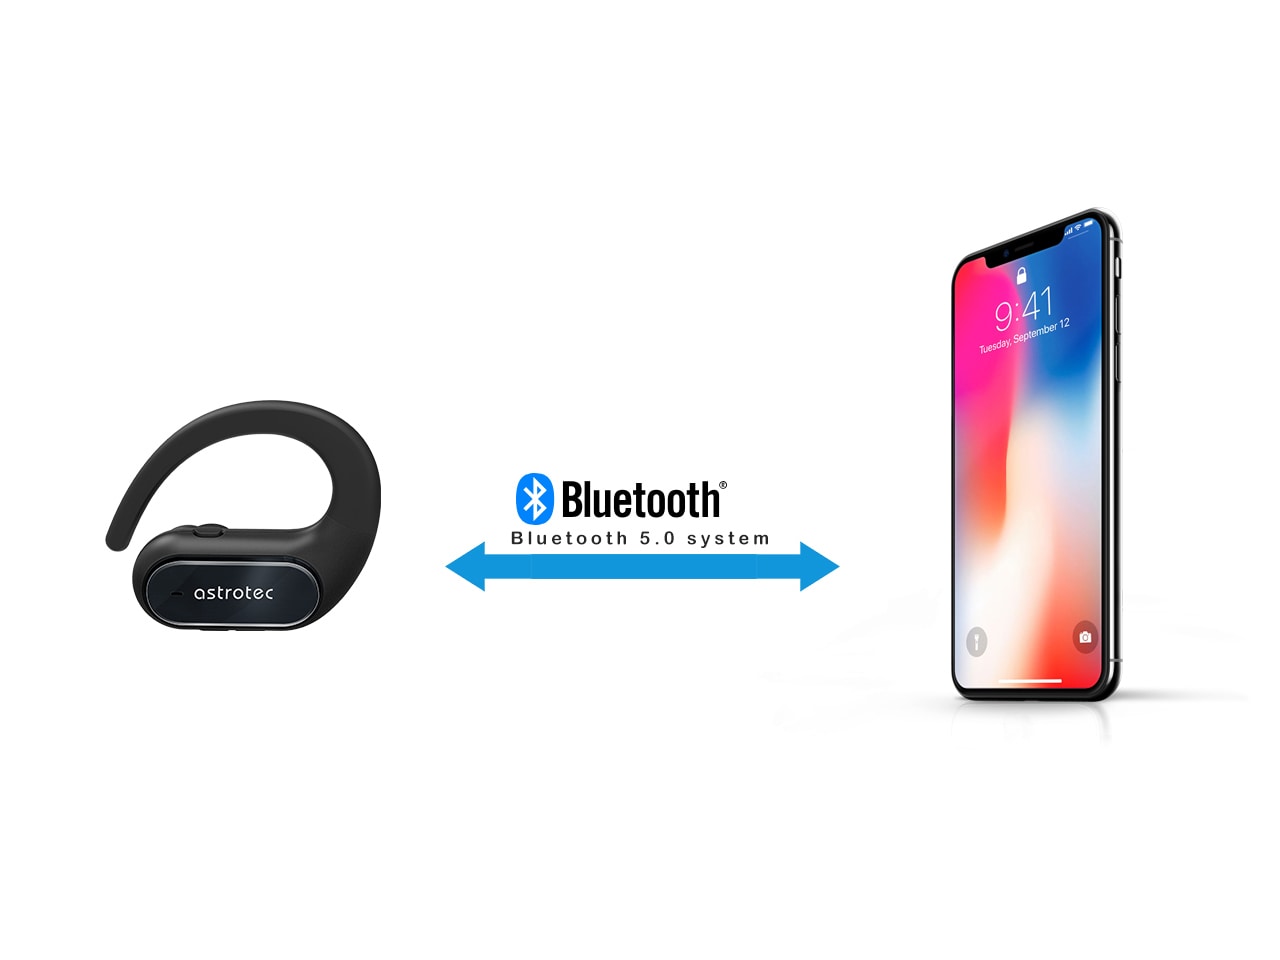 Featured the latest Bluetooth 5.0 technique, S70 has the strongest and most reliable connectivity between your devices, which means more incredibly detailed and robust high-resolution sound quality.